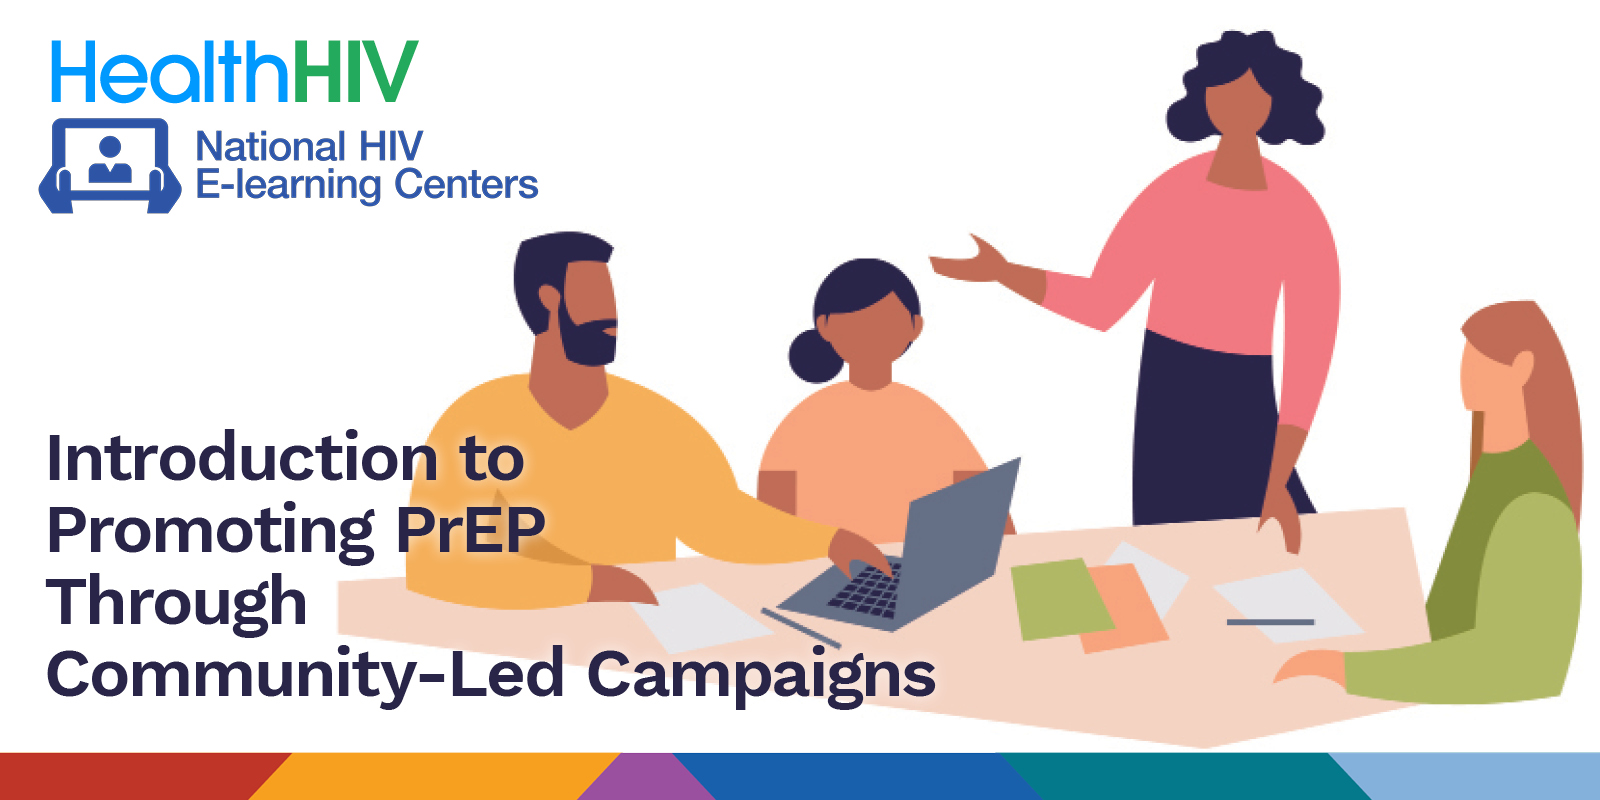 Introduction to Promoting PrEP Through Community-led Campaigns